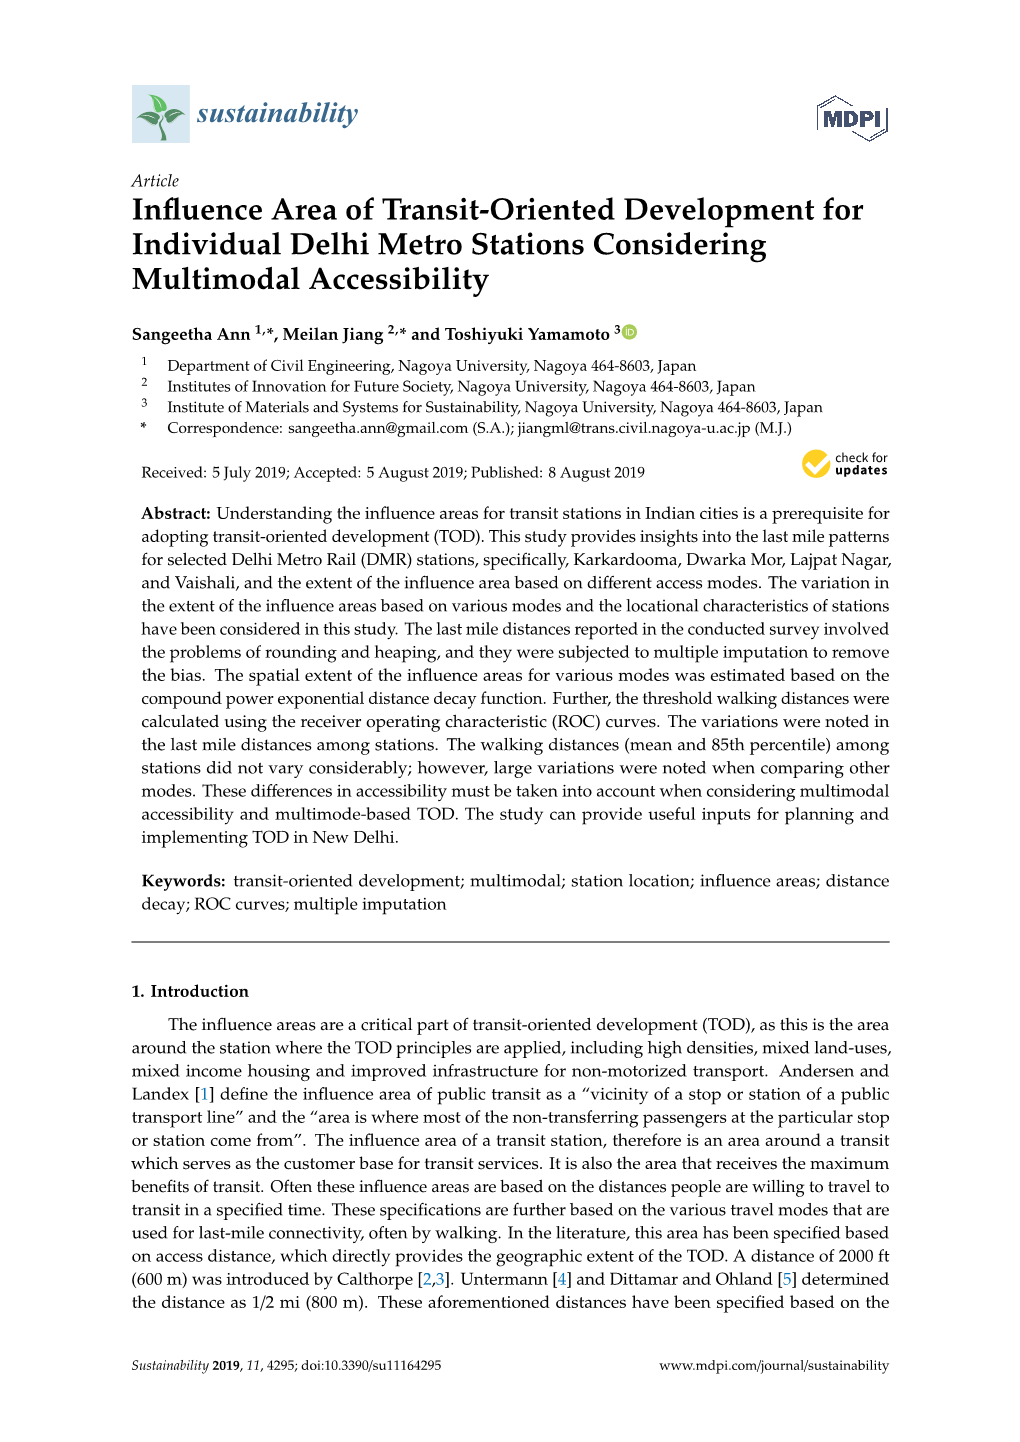 Influence Area of Transit-Oriented Development for Individual Delhi Metro Stations Considering Multimodal Accessibility